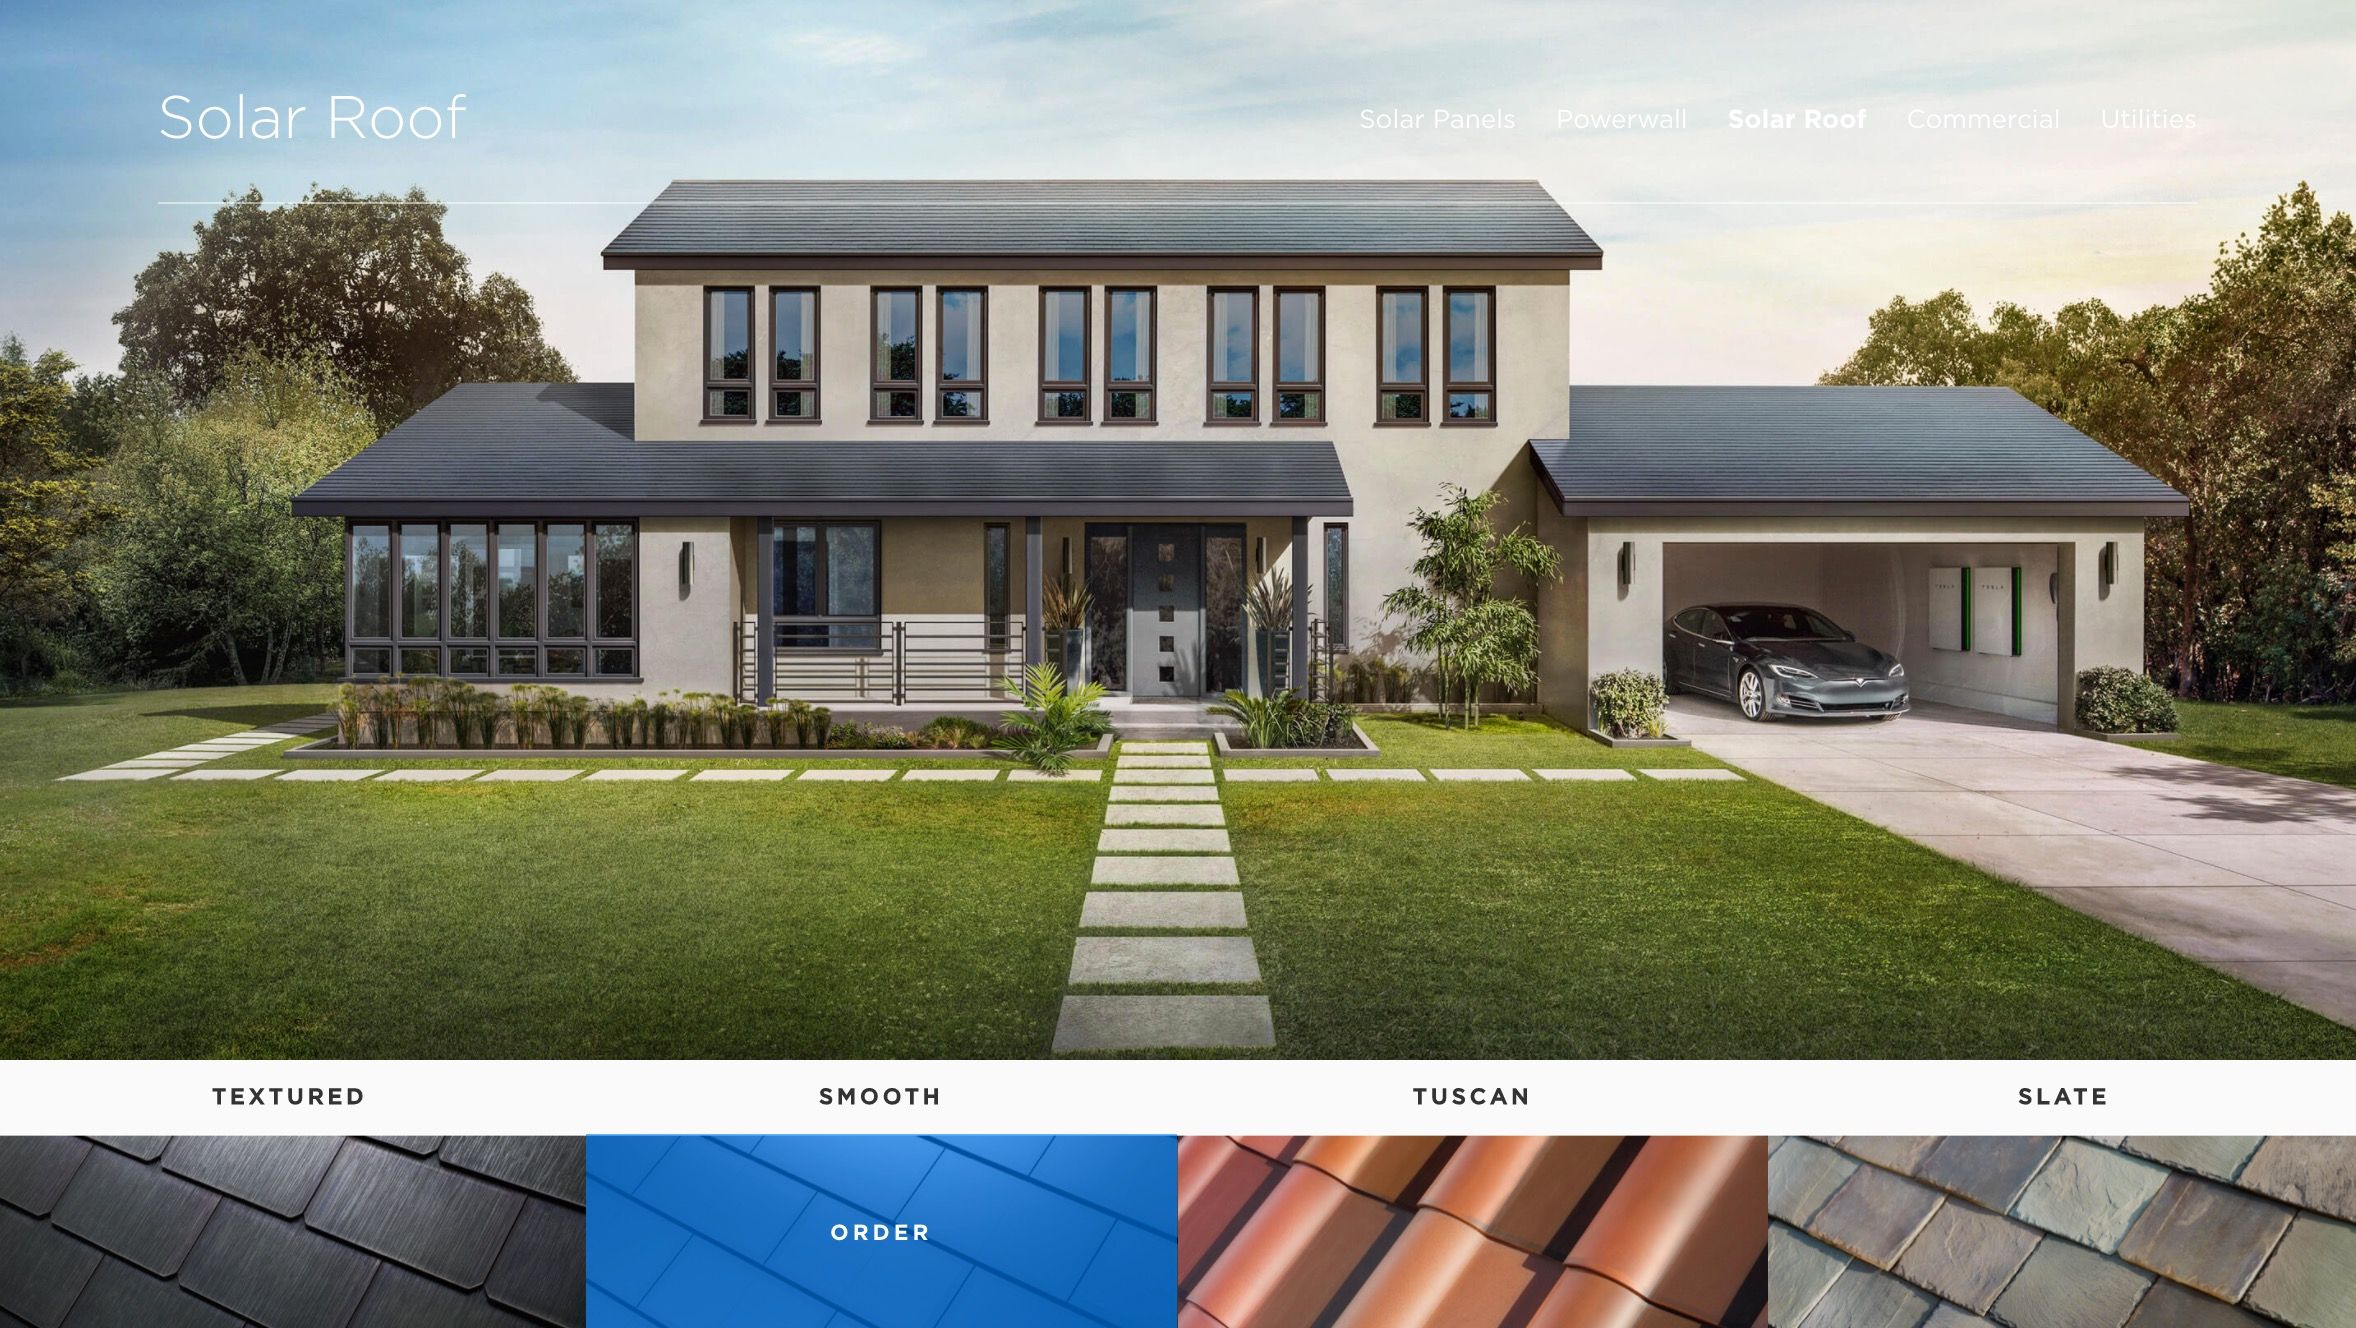 tesla solar roof everything you need to know image 2